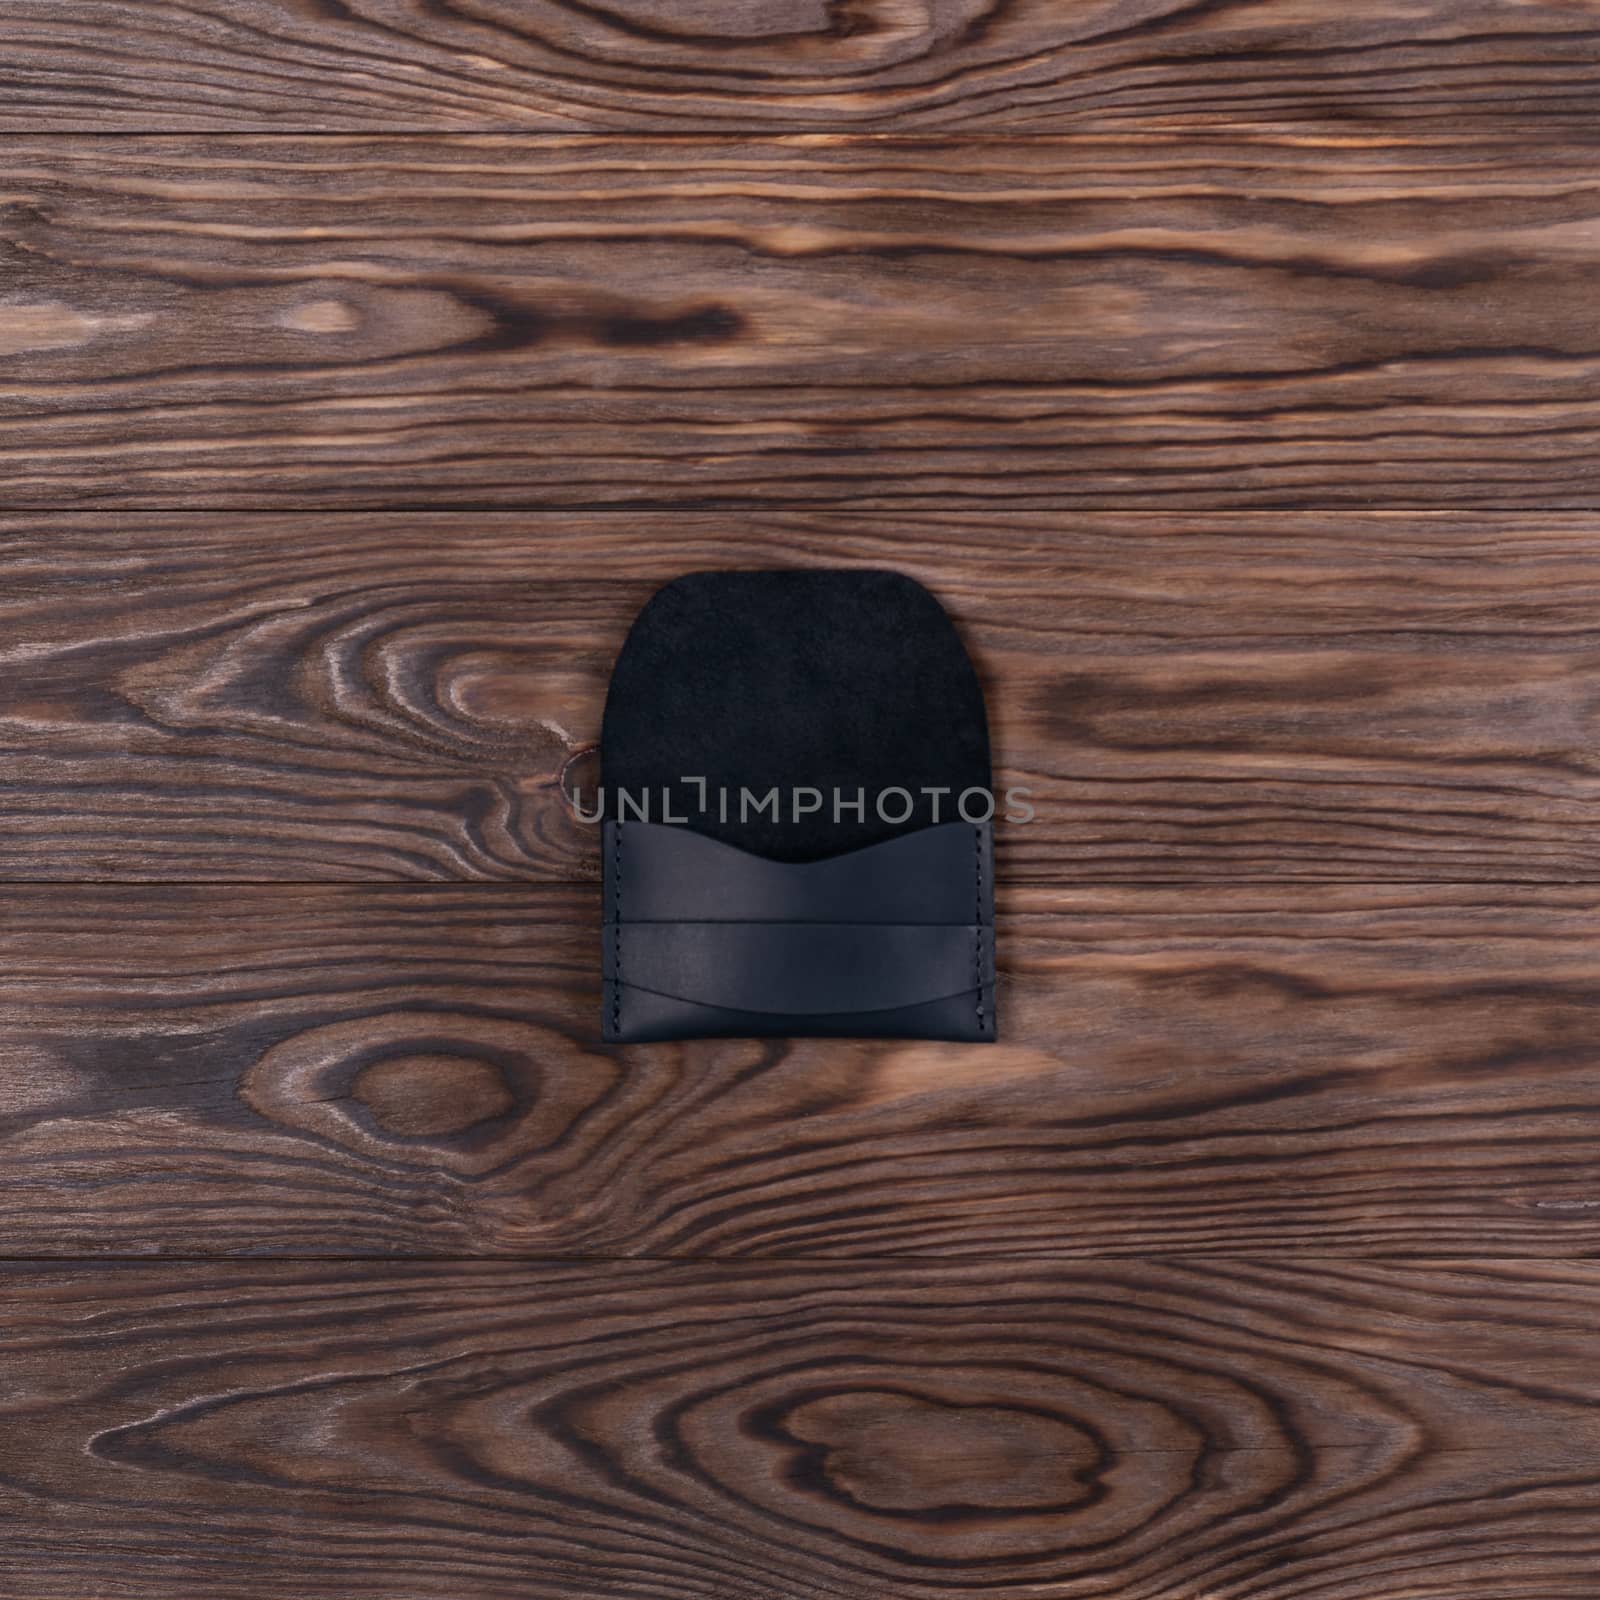 Flat lay photo of black colour handmade leather one pocket cardholder. Stock photo on wooden background.